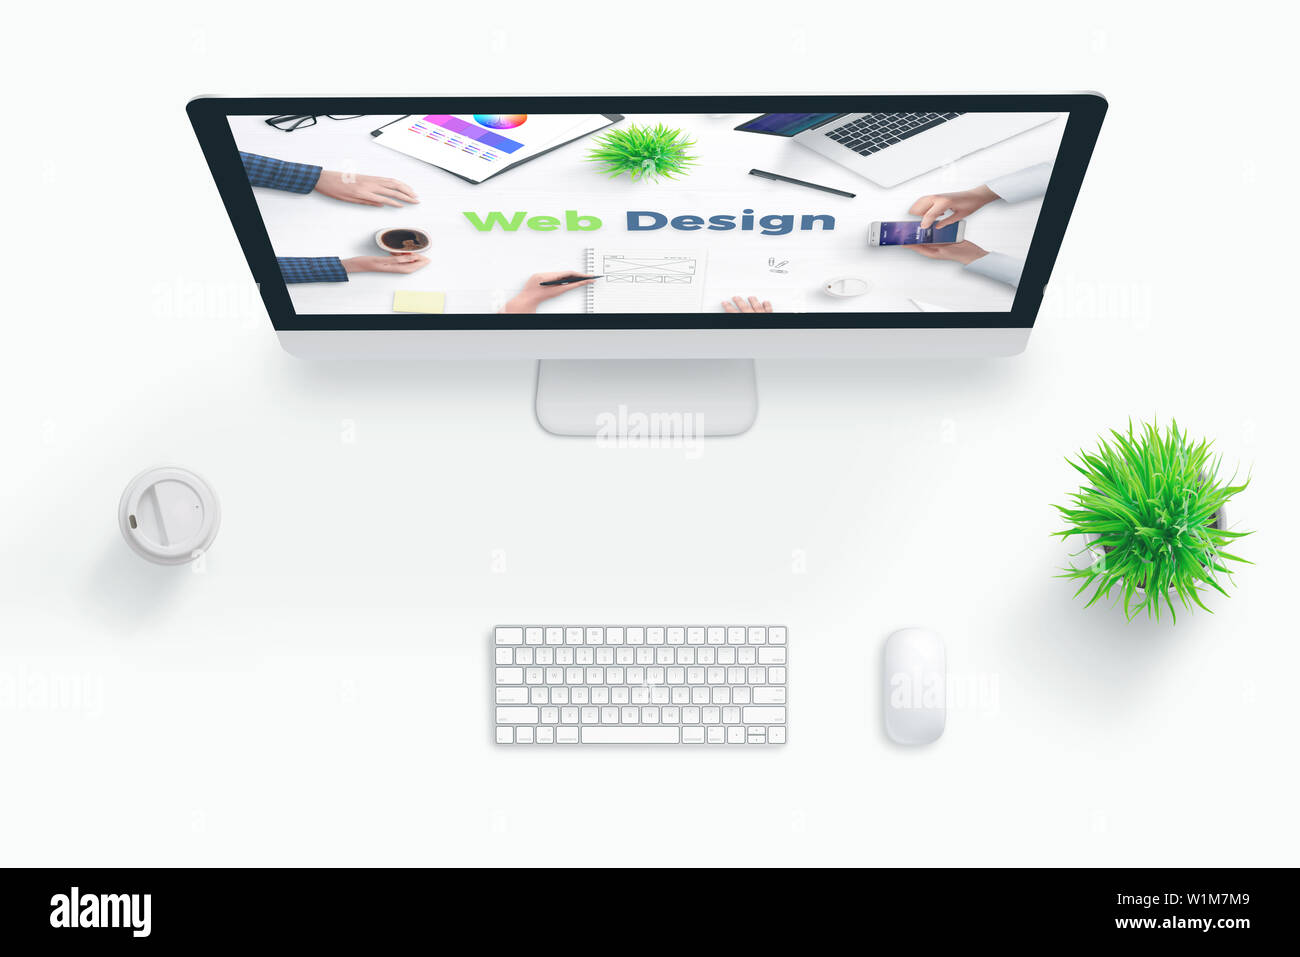 Web design studio concept. Flat lay scene with computer display and web design text. Stock Photo